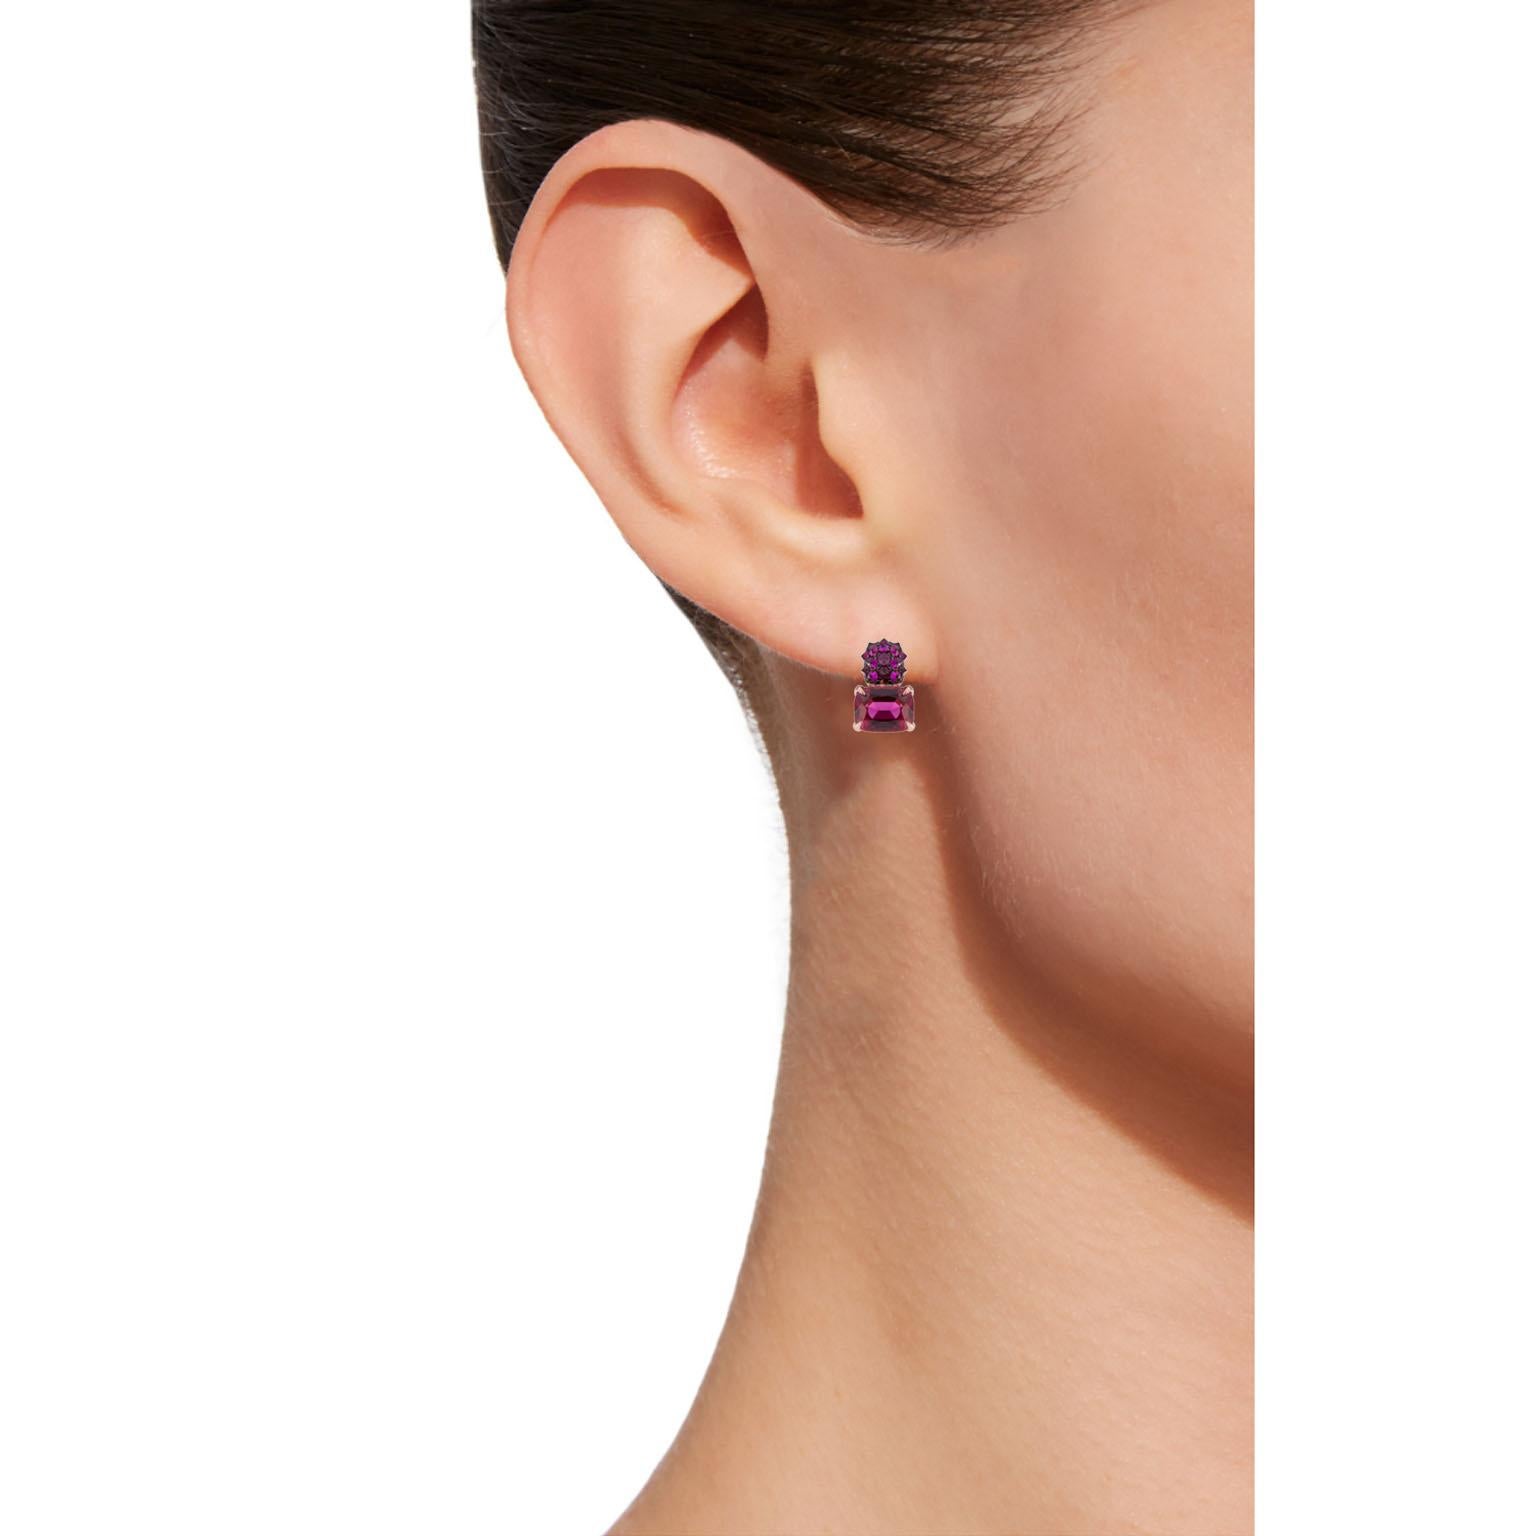 Jona design collection, hand crafted in Italy, 18 karat rose gold earrings showcasing a pair of cushion cut intense red spinels weighing 1.23 total carats. The top portion of the earrings feature 0.29 carats of rubies, set upside down with the point